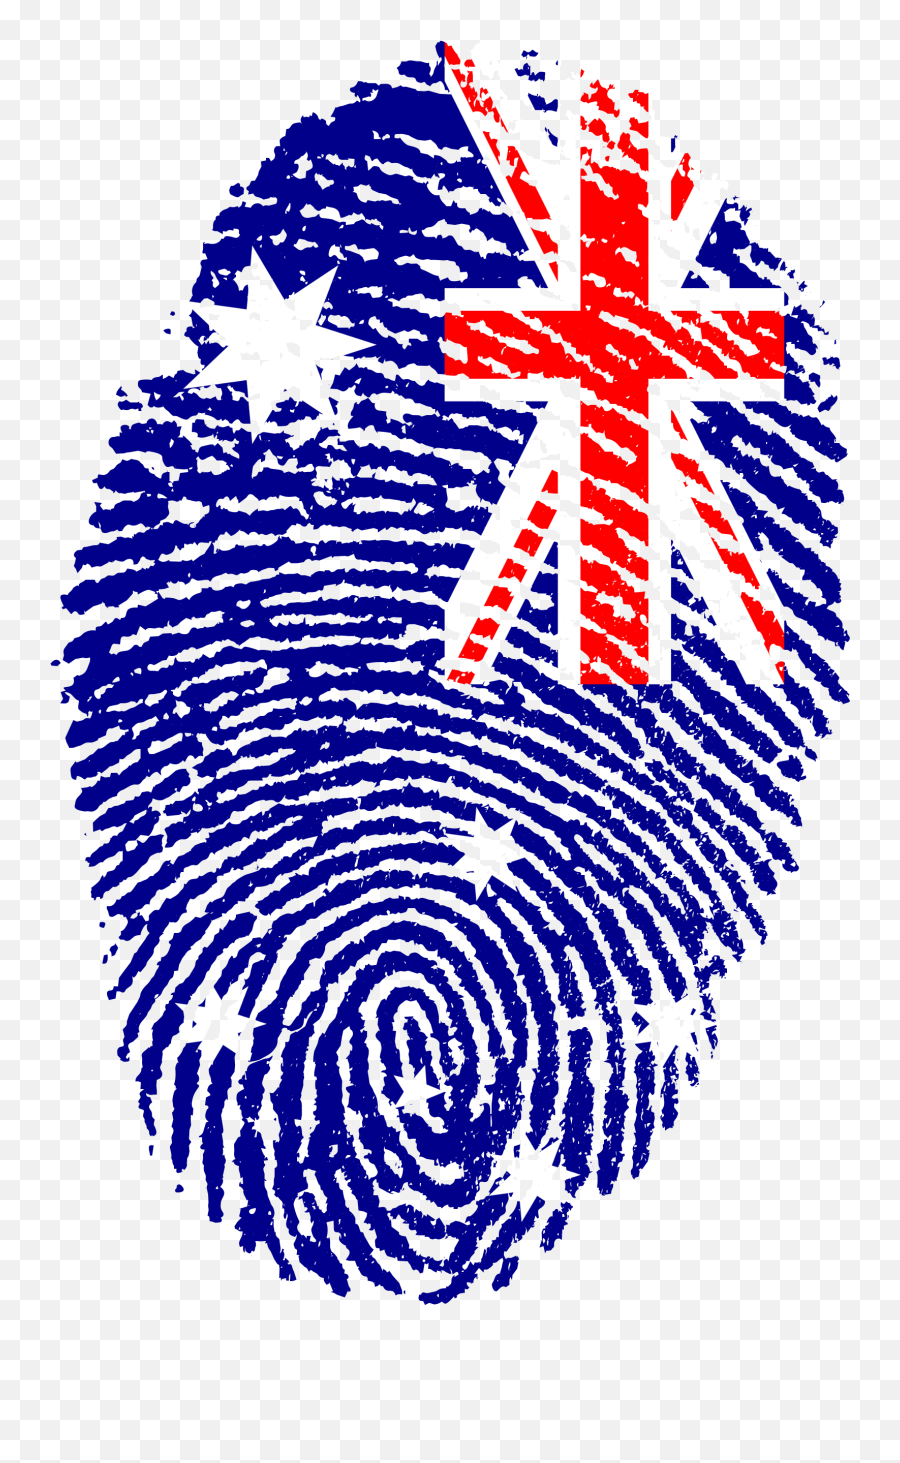 Clipart Of Australia Flag In A Shape Of - Australia Flag Fingerprint Emoji,Australia Flag Png